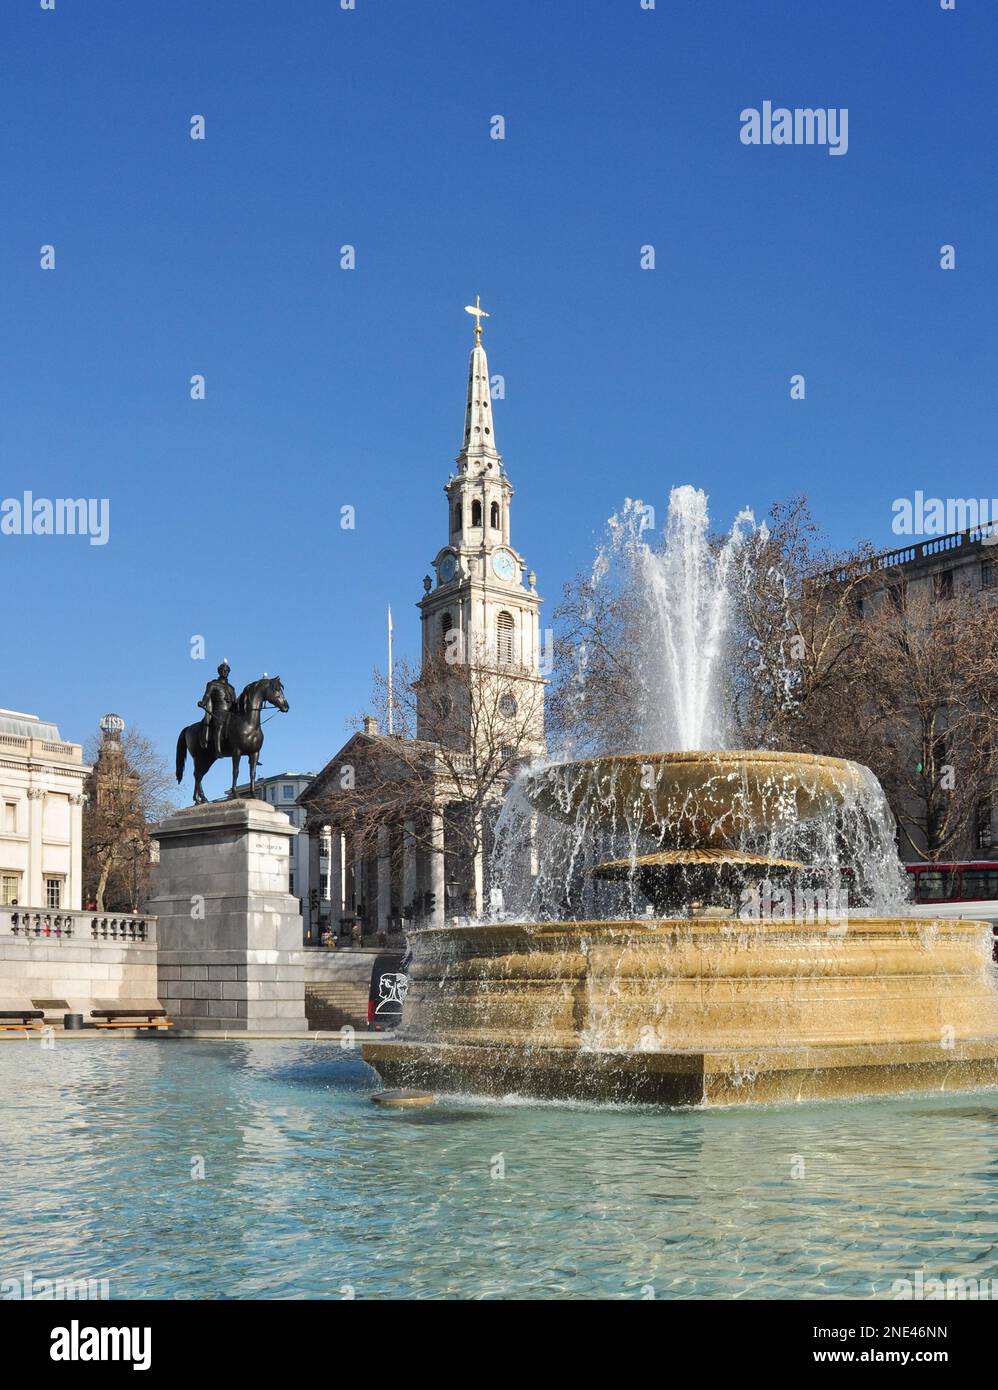 The Church of St Martin-in-the-Fields, equine statue of King George IV and fountain in Trafalgar Square, London, England, UK Stock Photo